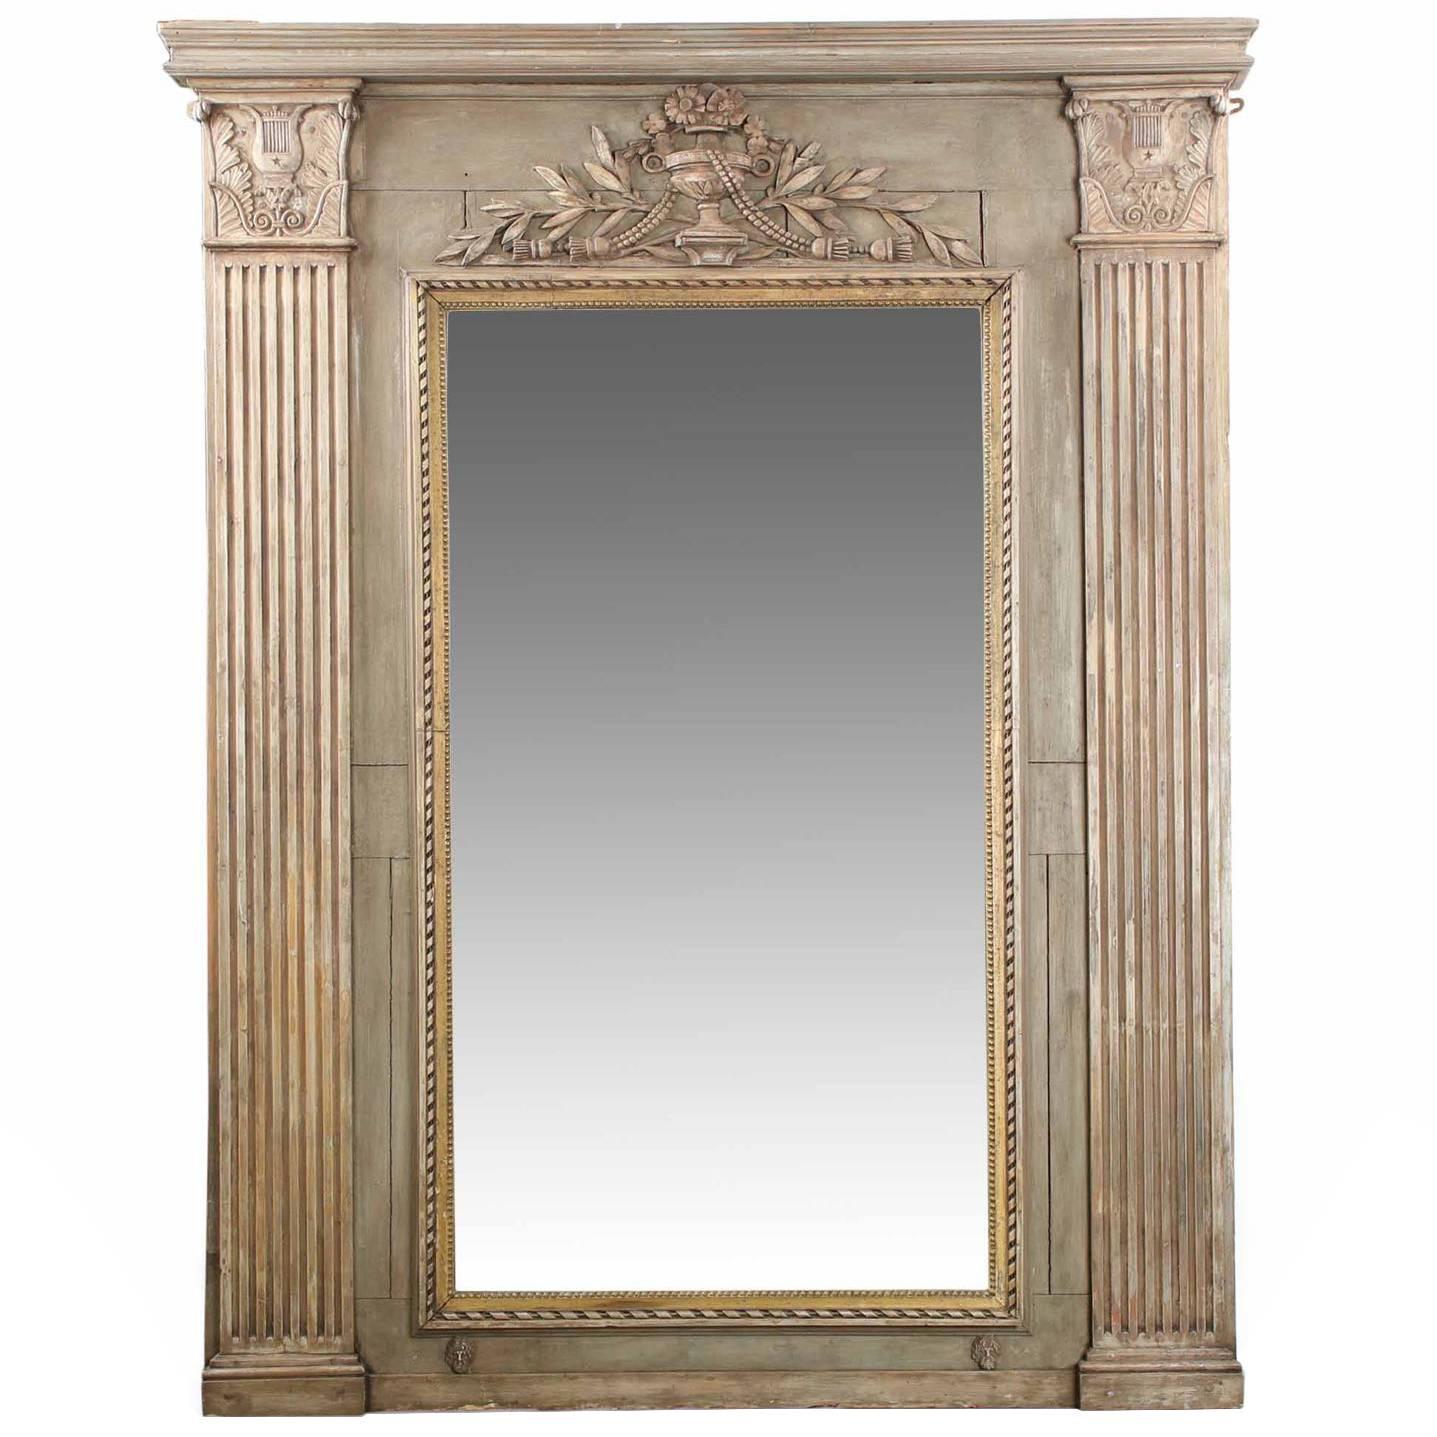 French Neoclassical Period Carved and Painted Wall Mirror